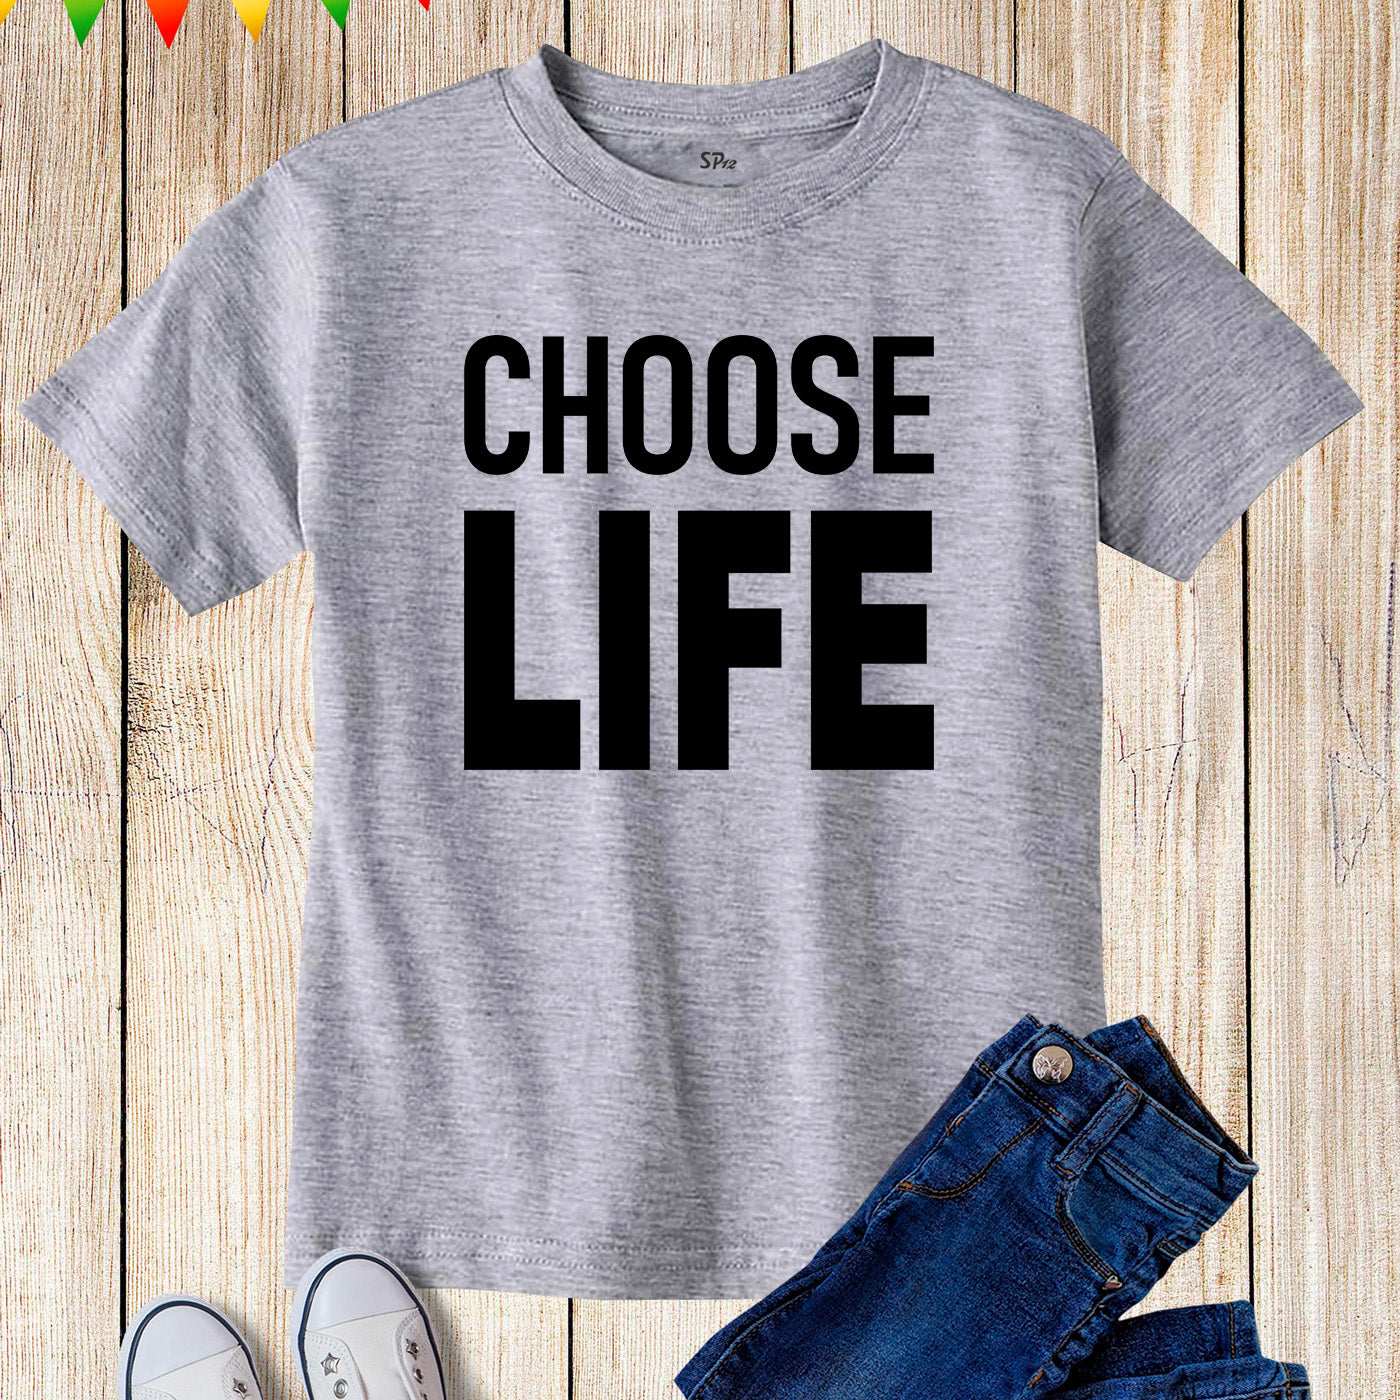 CHOOSE LIFE Kids T-Shirt George Michael WHAM 80s Costume Party Re